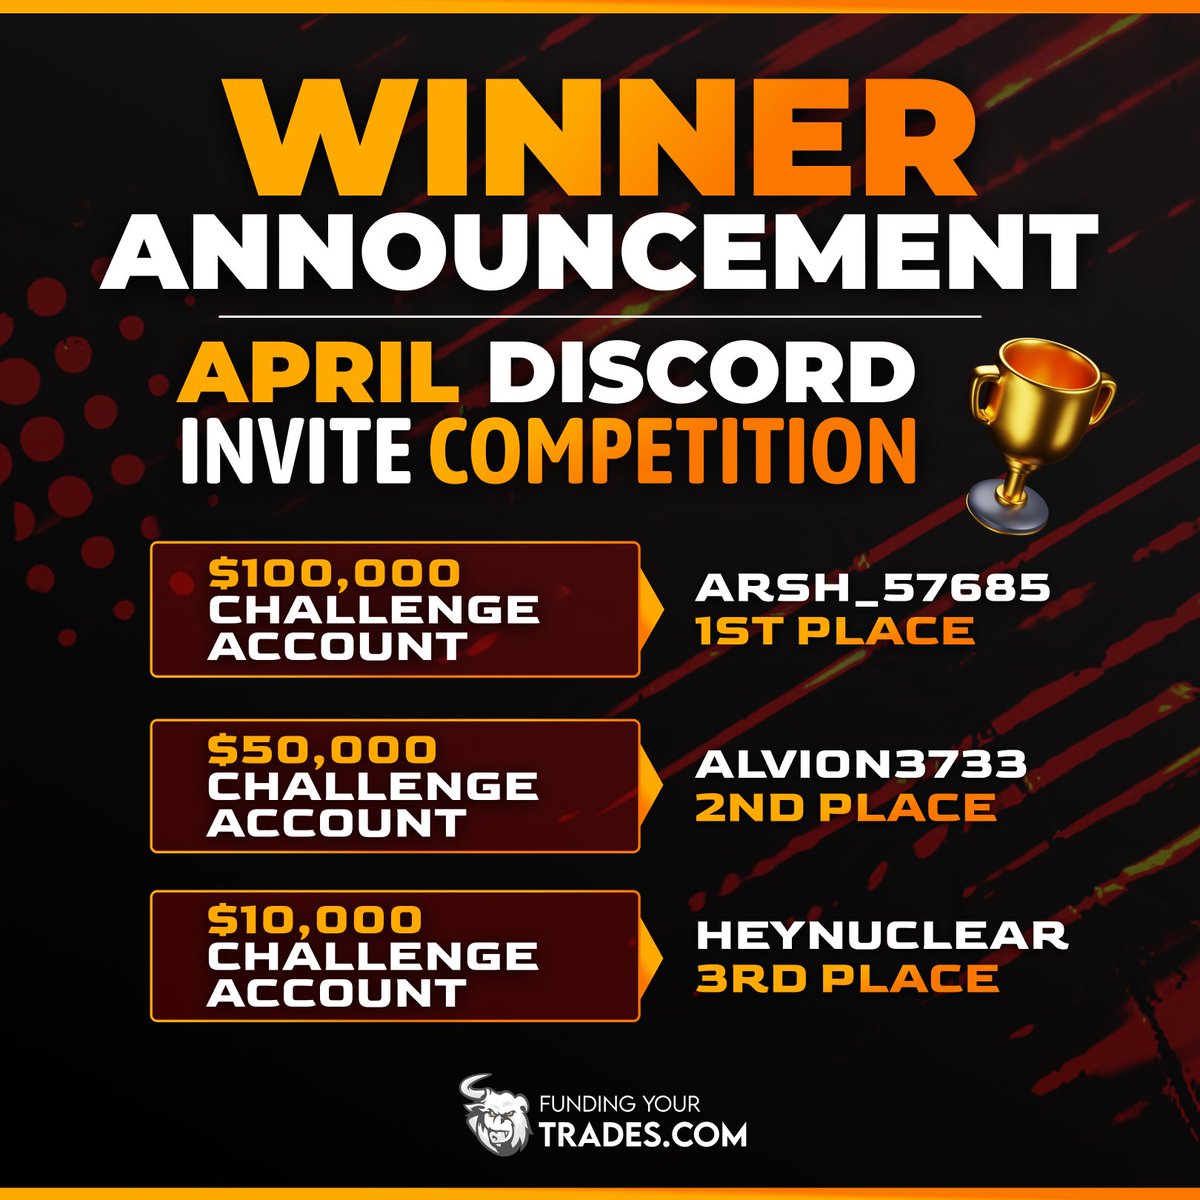 🎉 Winners announced for FYT Discord invite contest! 🥇 1st: ARSH_57685 - $100K Challenge Account 🥈 2nd: ALVION3733 - $50K Challenge Account 🥉 3rd: HEYNUCLEAR - $10K Challenge Account Congrats to these traders! More competitions coming soon! 🚀 . #propfirm